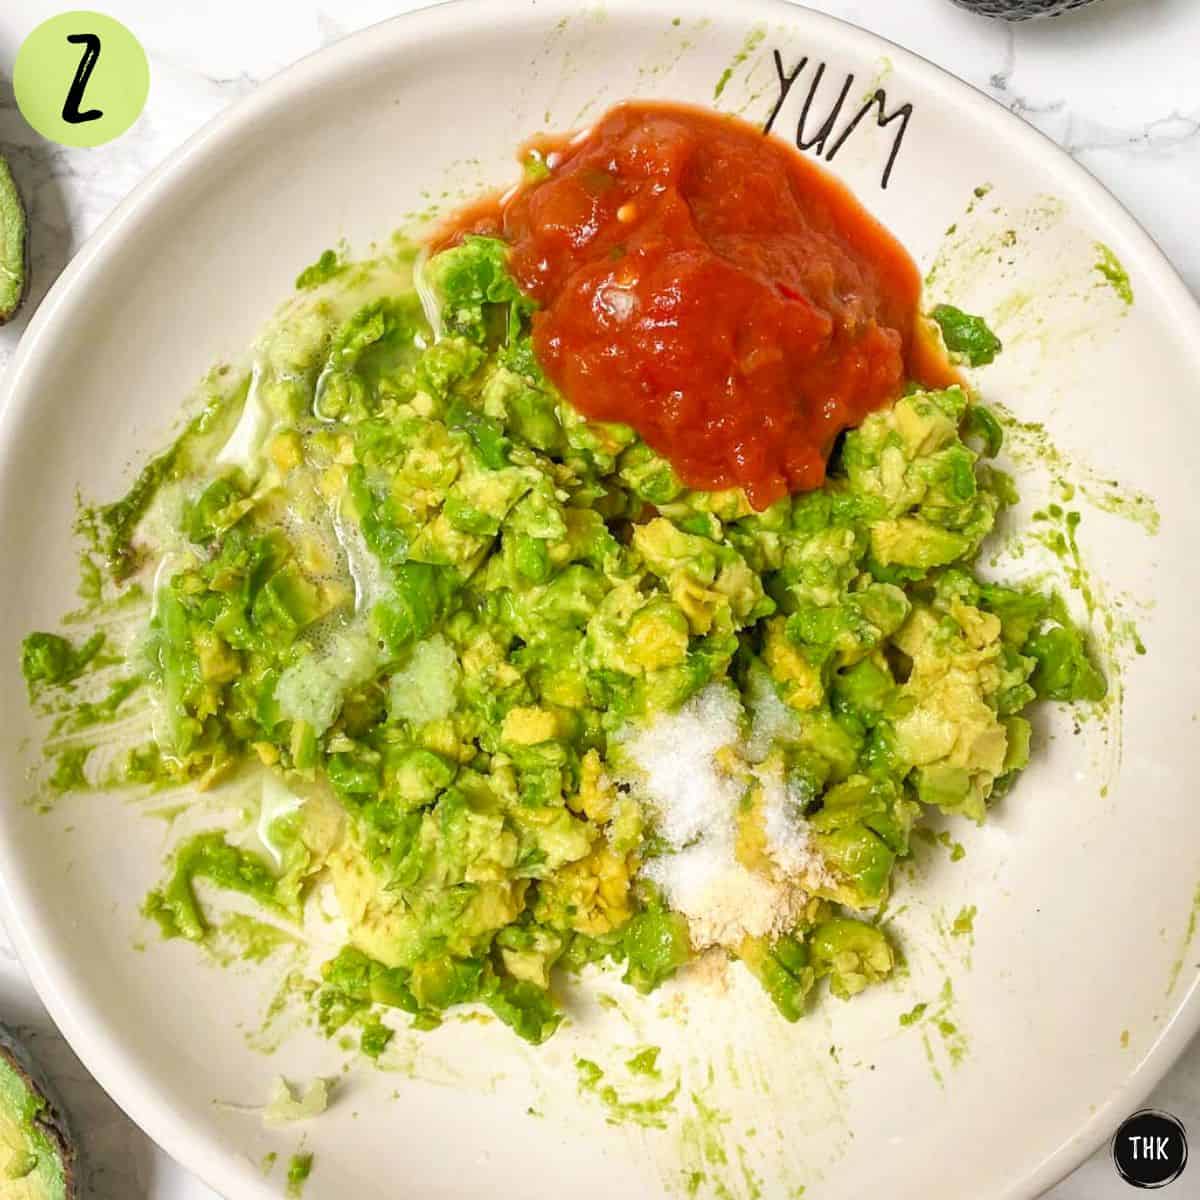 Mashed avocado, lime juice, salt, and salsa in white bowl.